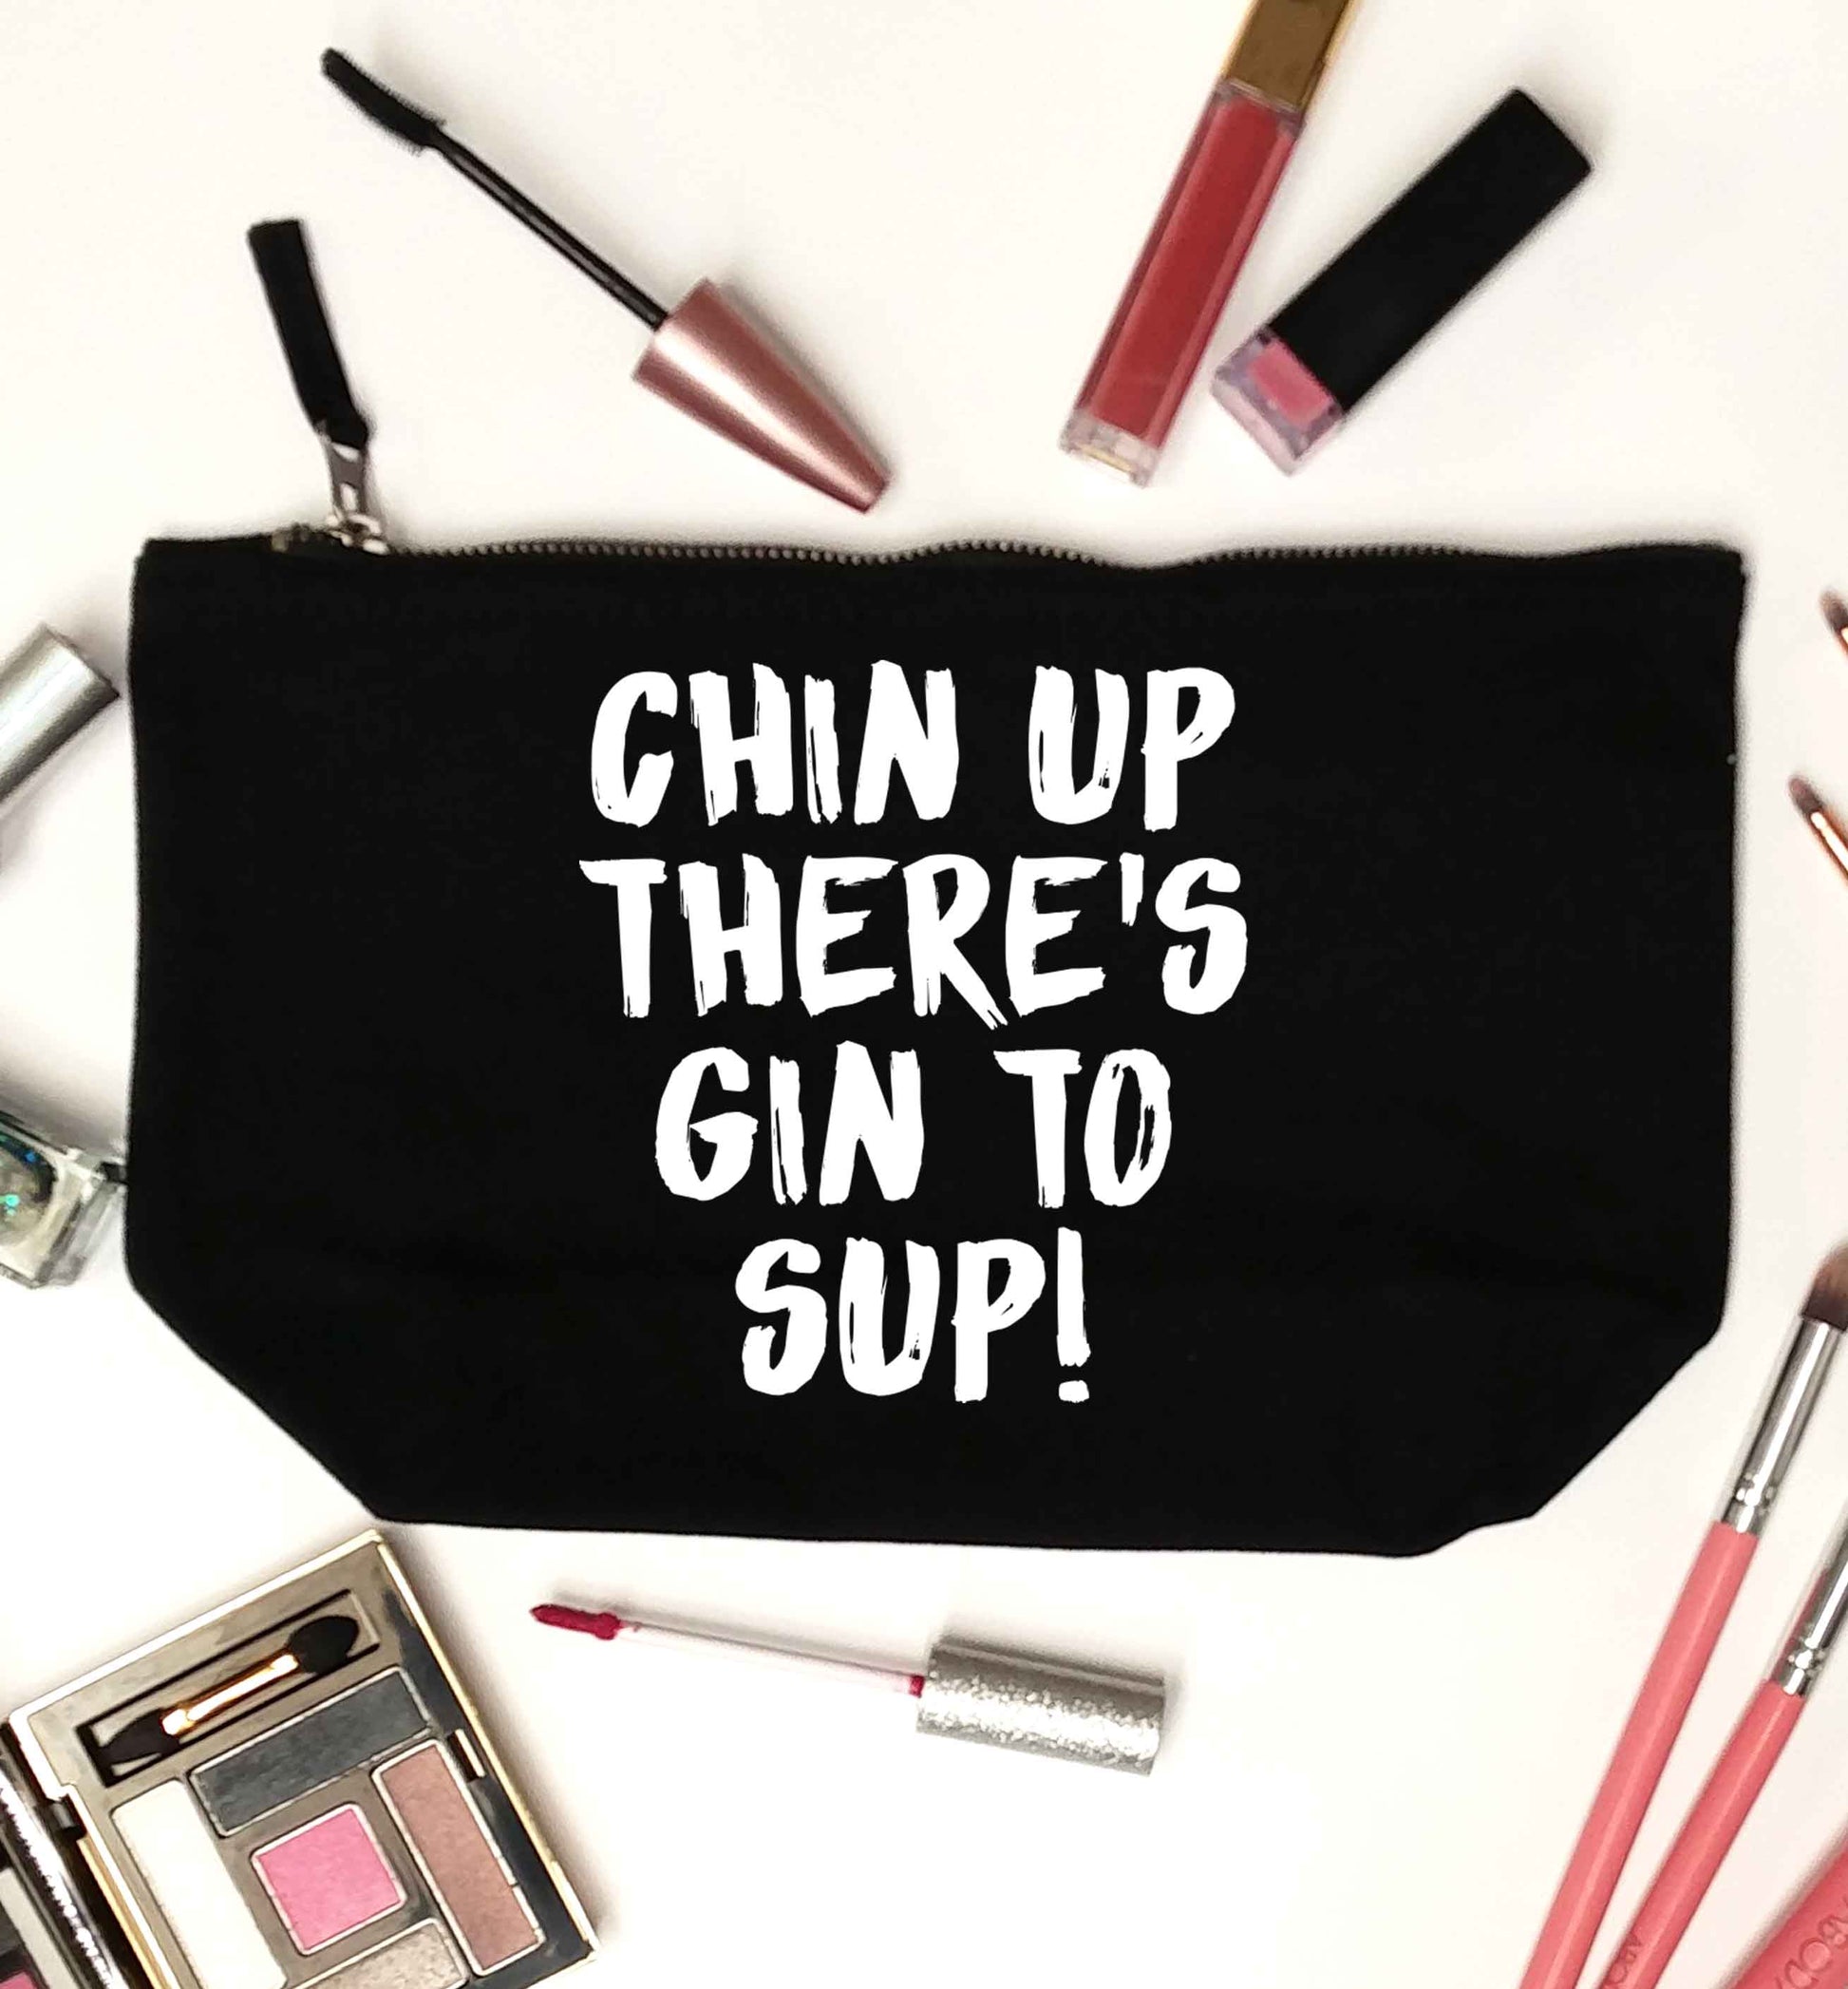 Chin up there's gin to sup black makeup bag